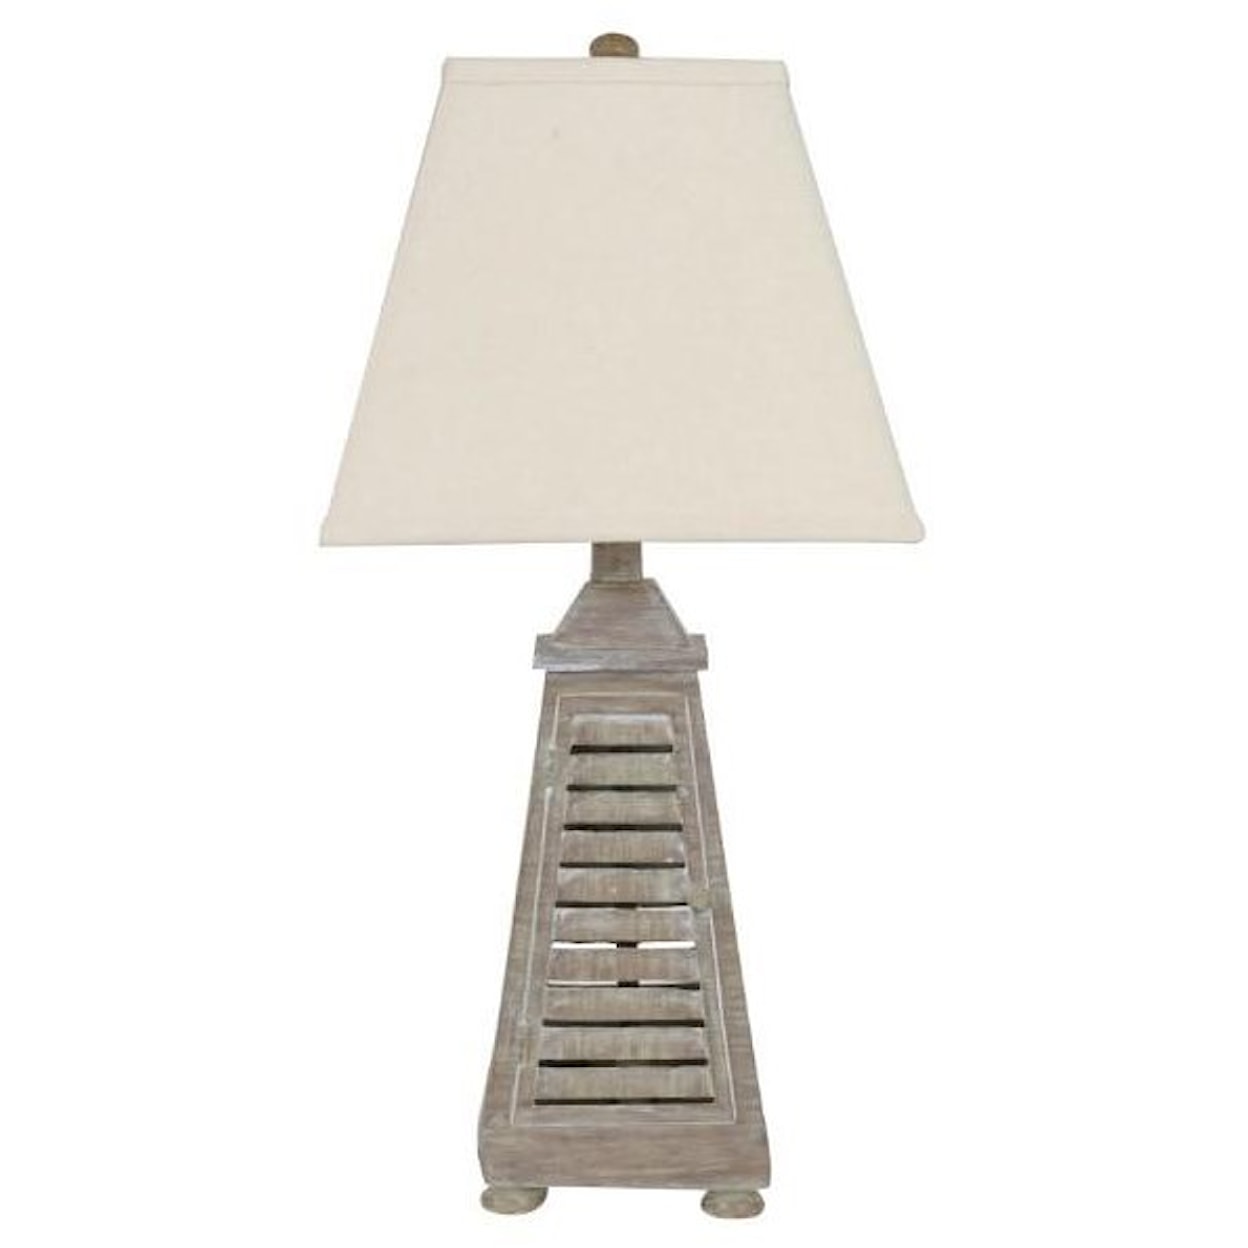 Crestview Collection Lighting Shutter Tower Table Lamp